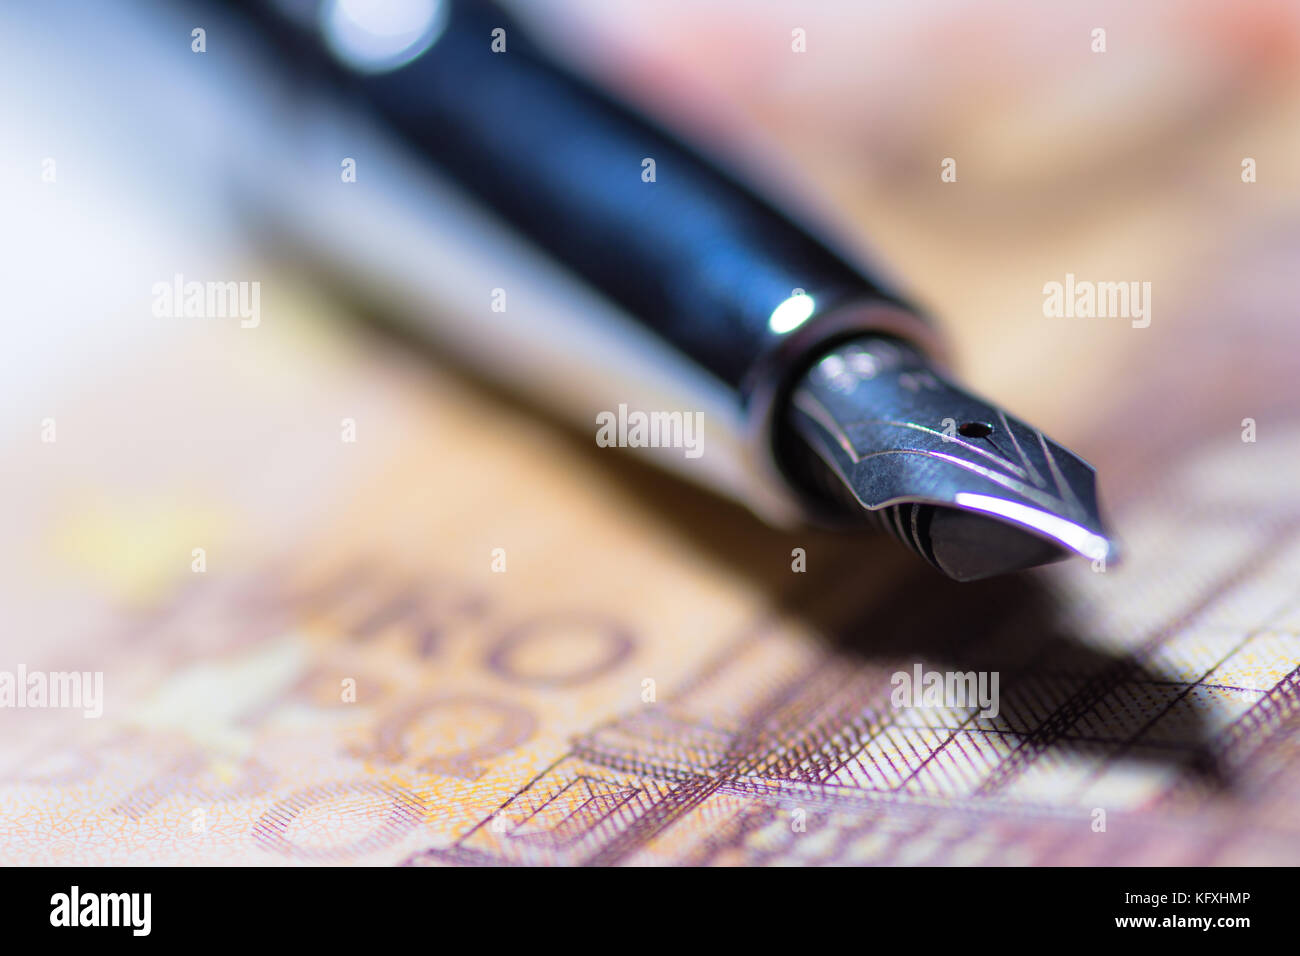 Journalists bribery concept with pen and banknote. Stock Photo